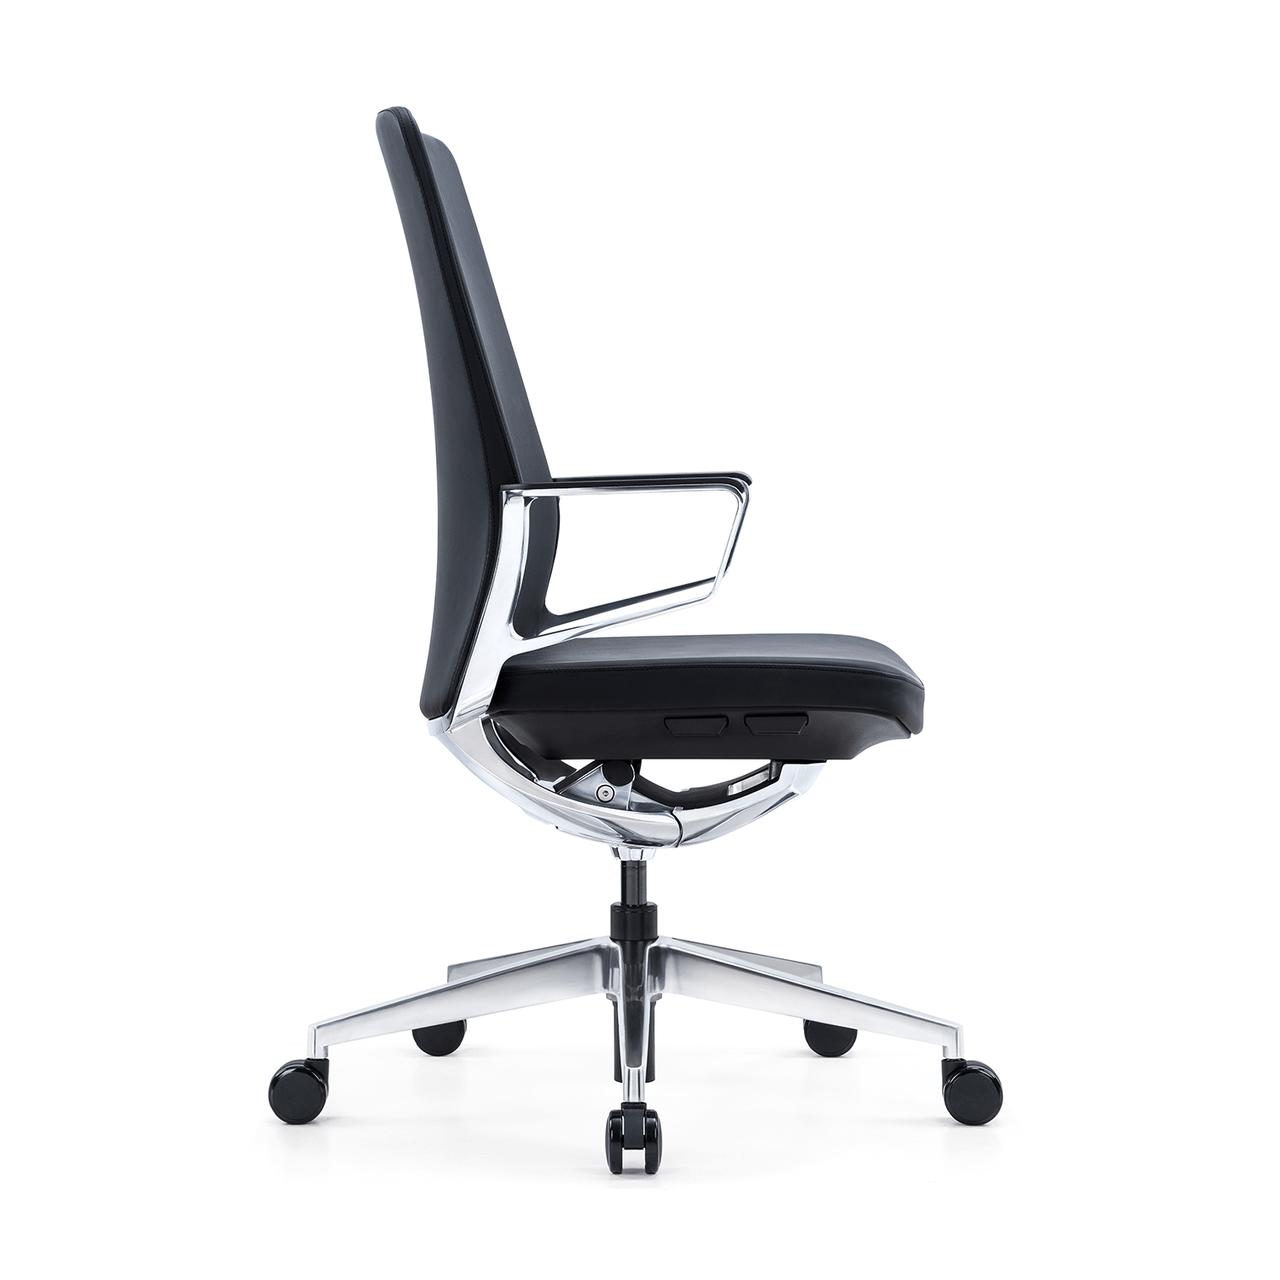  i5 Industries Gravity Executive Leather Conference Chair 